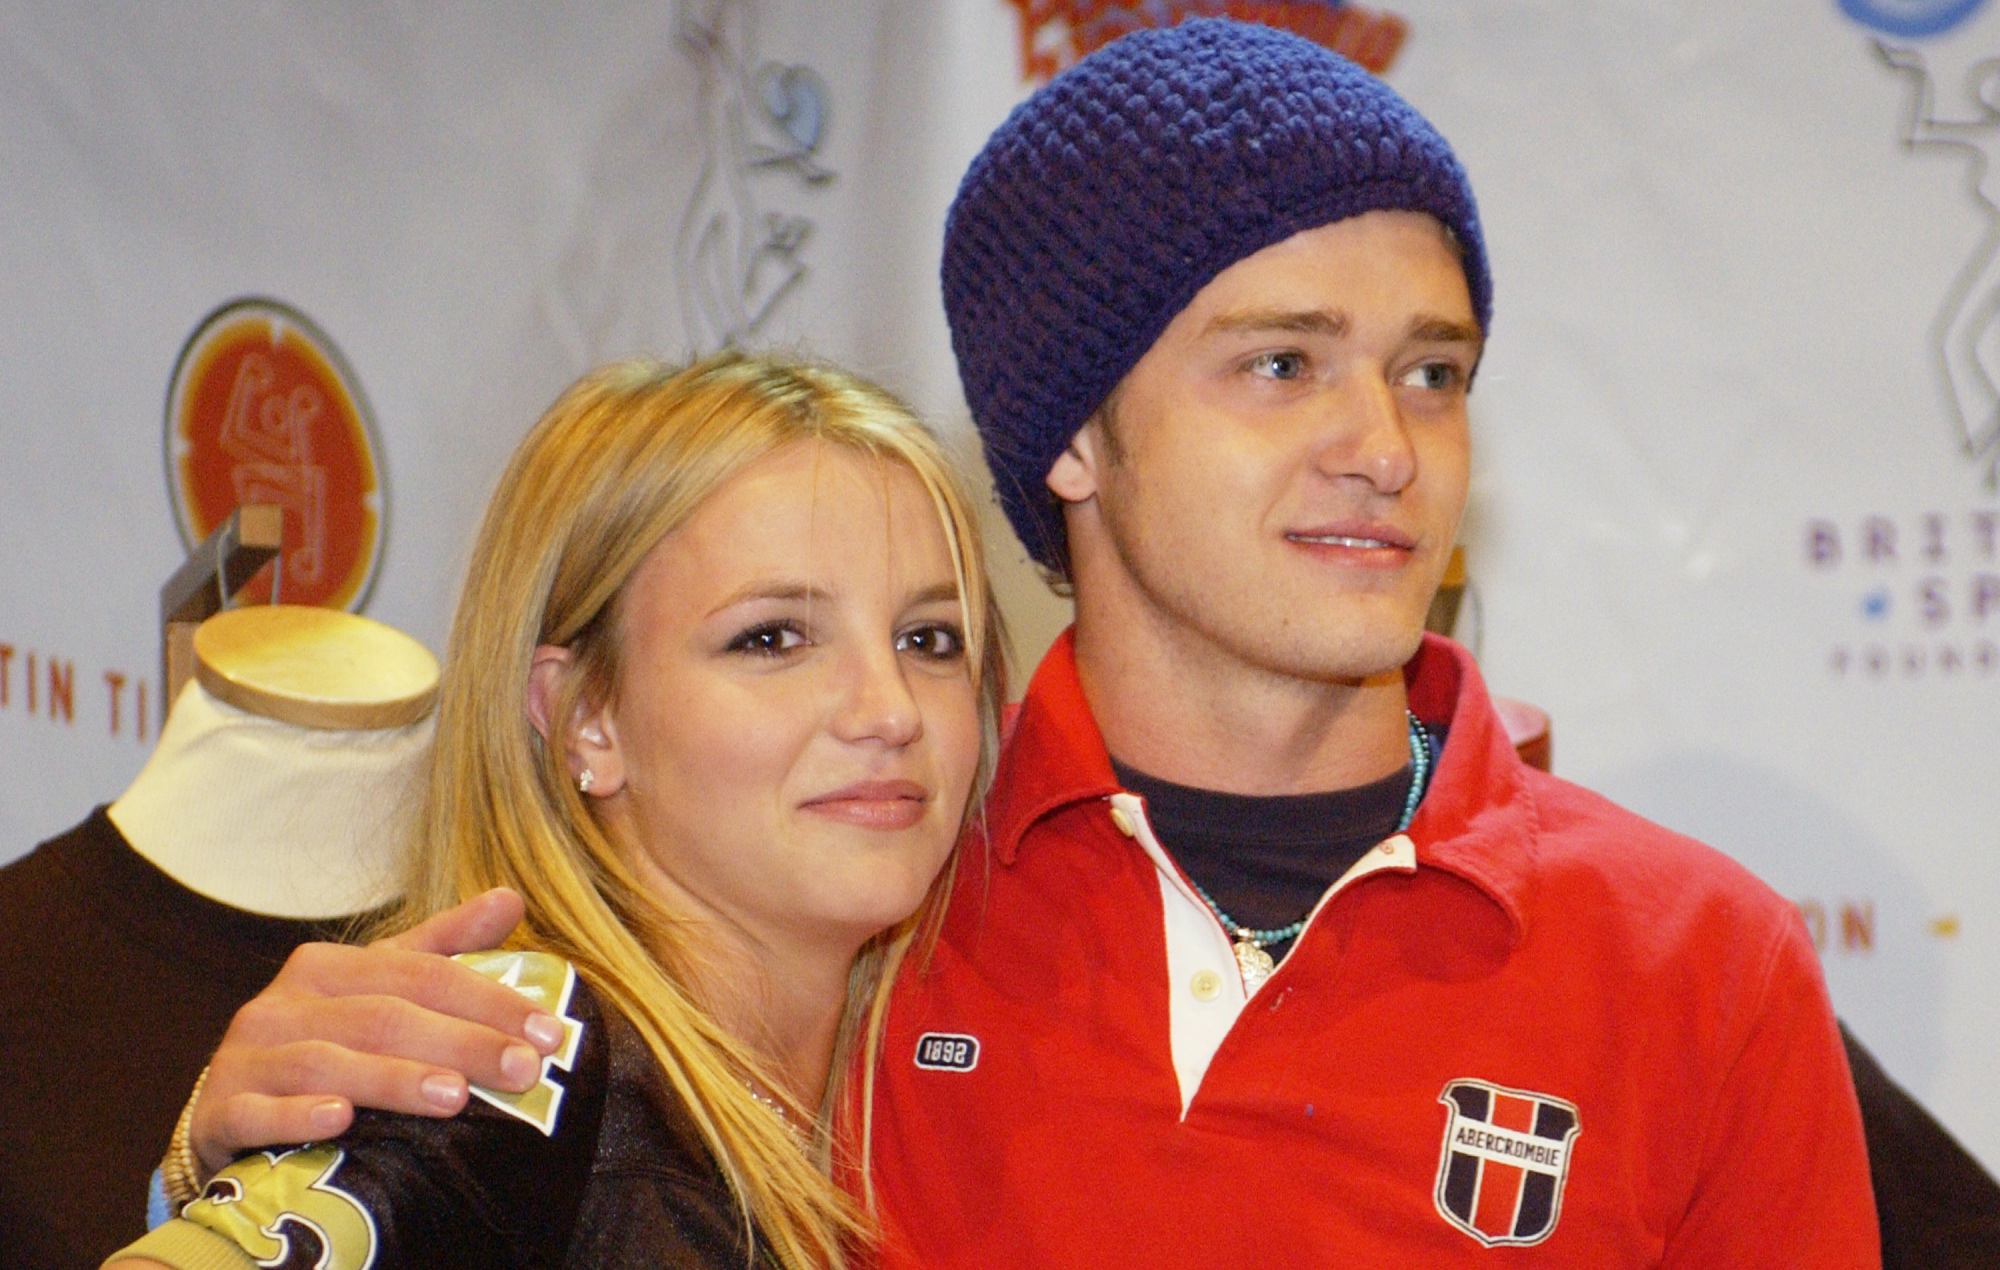 Britney Spears could “barely speak for months” following break-up with Justin Timberlake